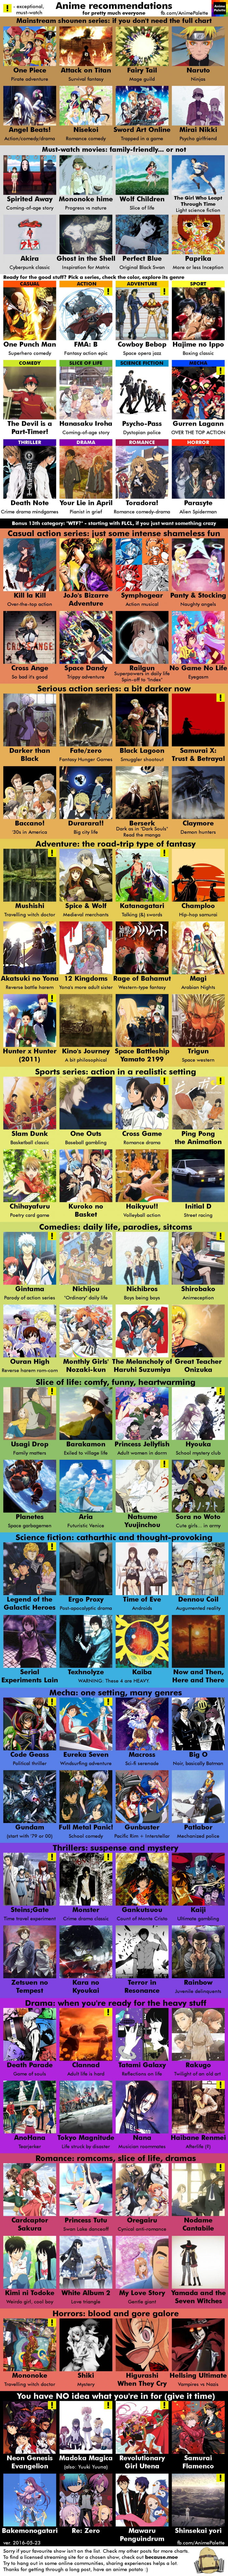 Anime recommendations Image